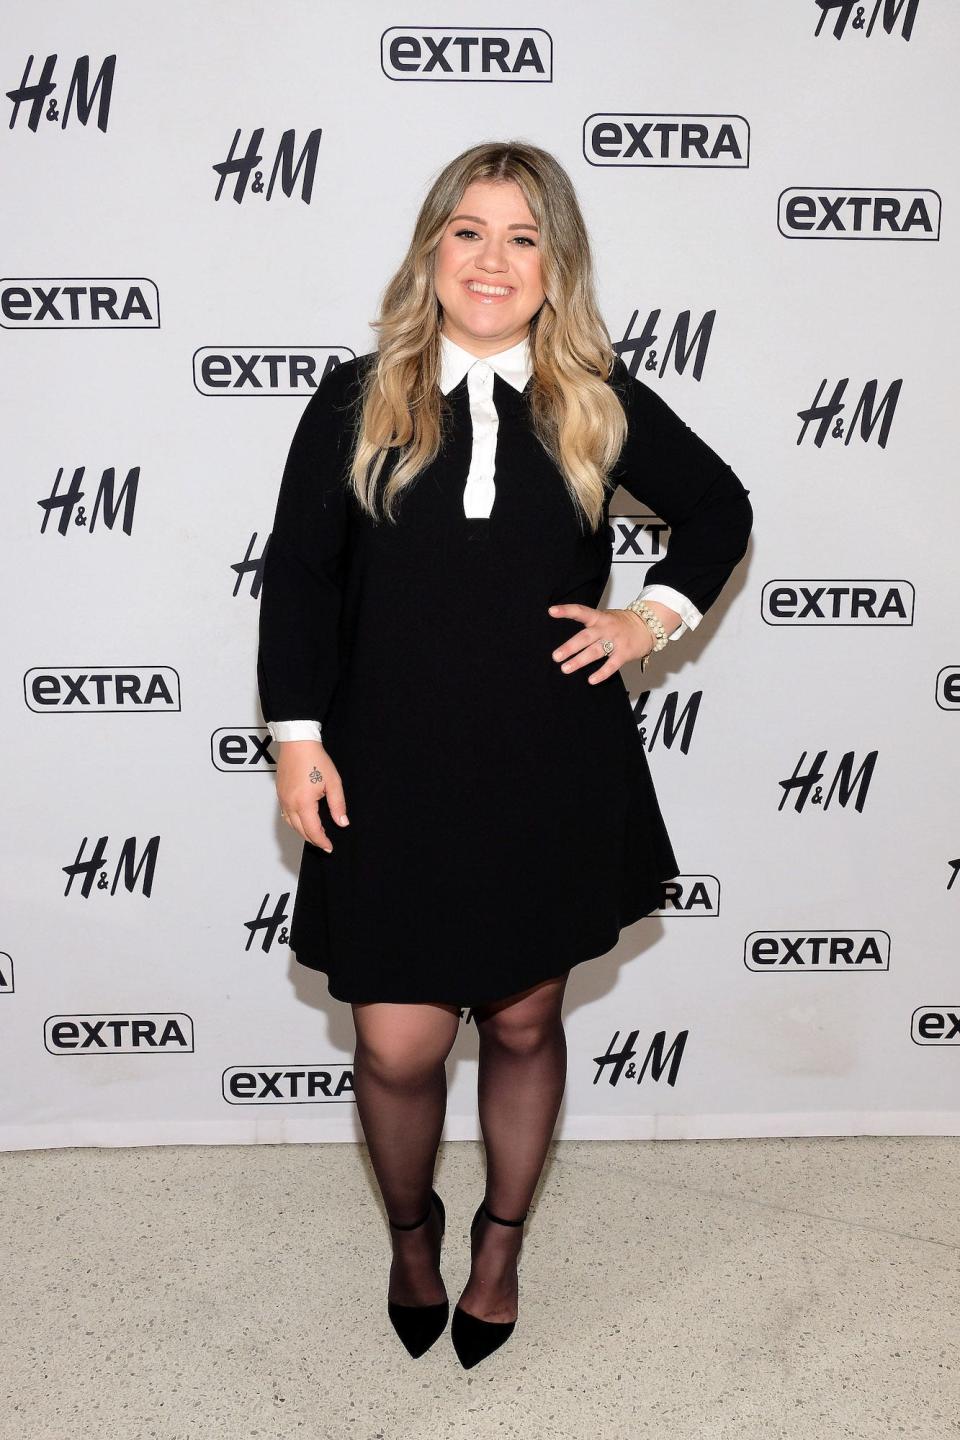 Kelly Clarkson makes a 2016 appearance on "Extra" in New York City.